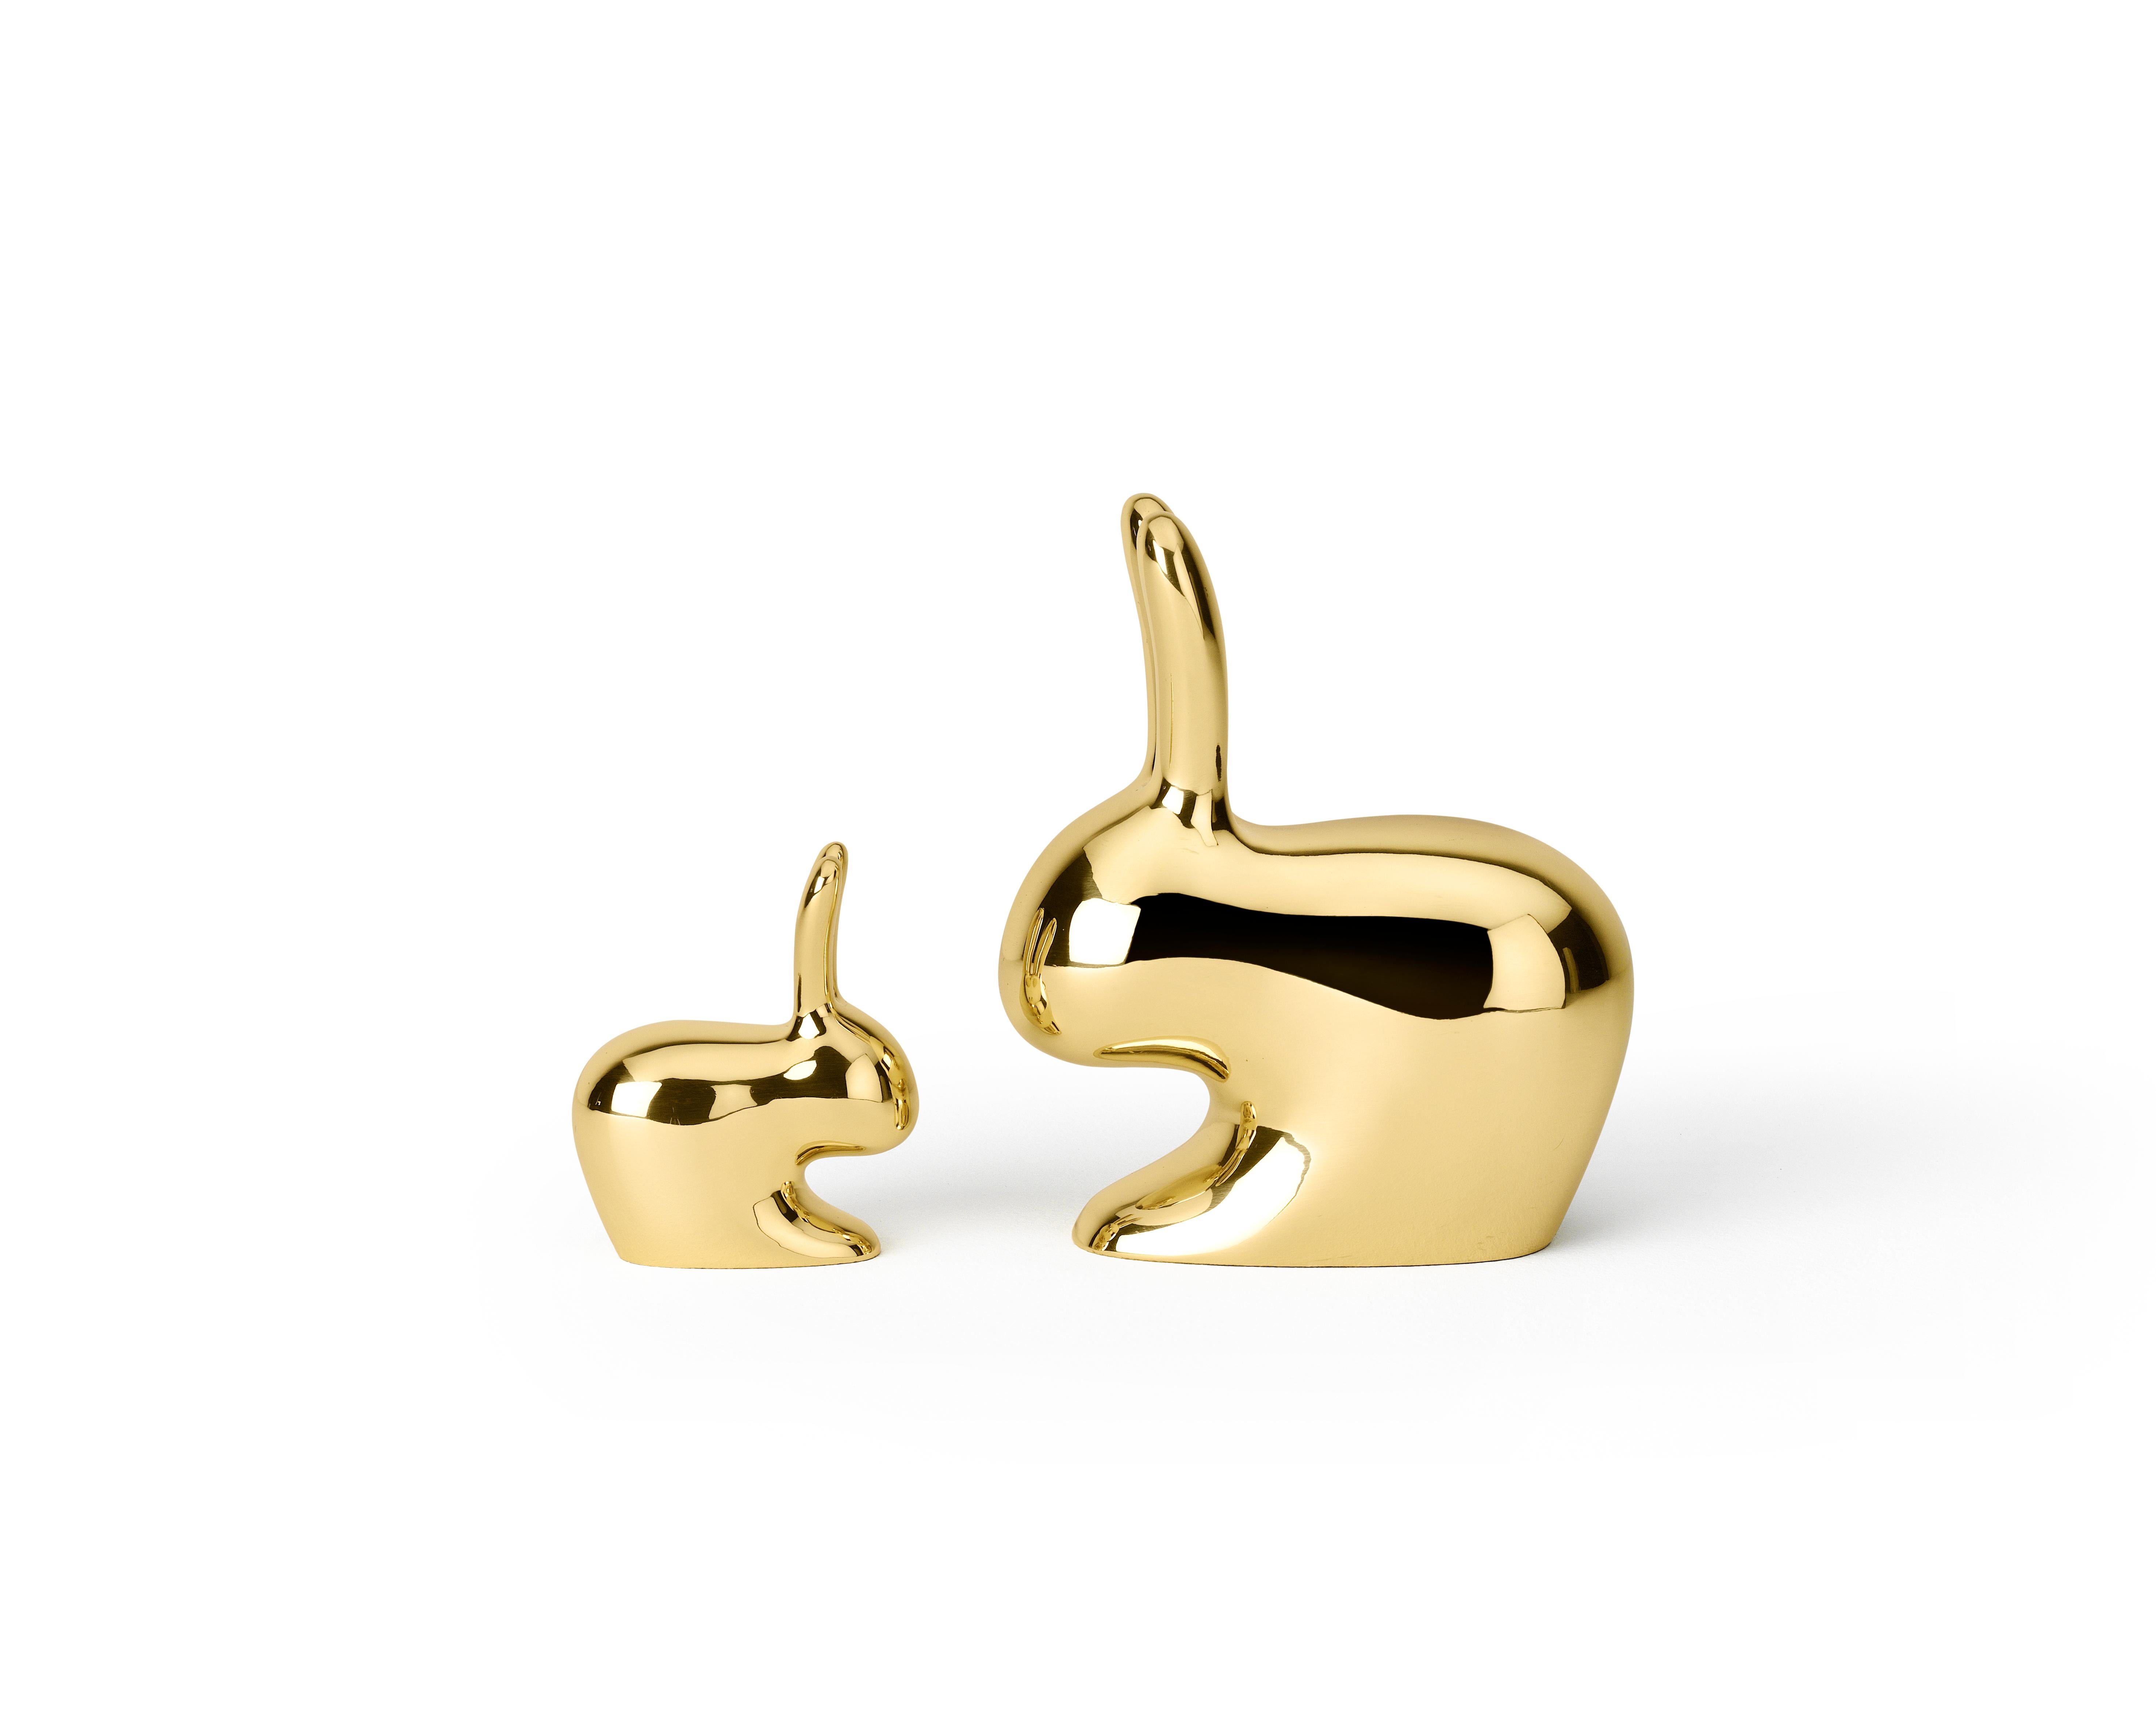 Modern Ghidini 1961 Small Rabbit in Polished Brass by Stefano Giovannoni For Sale